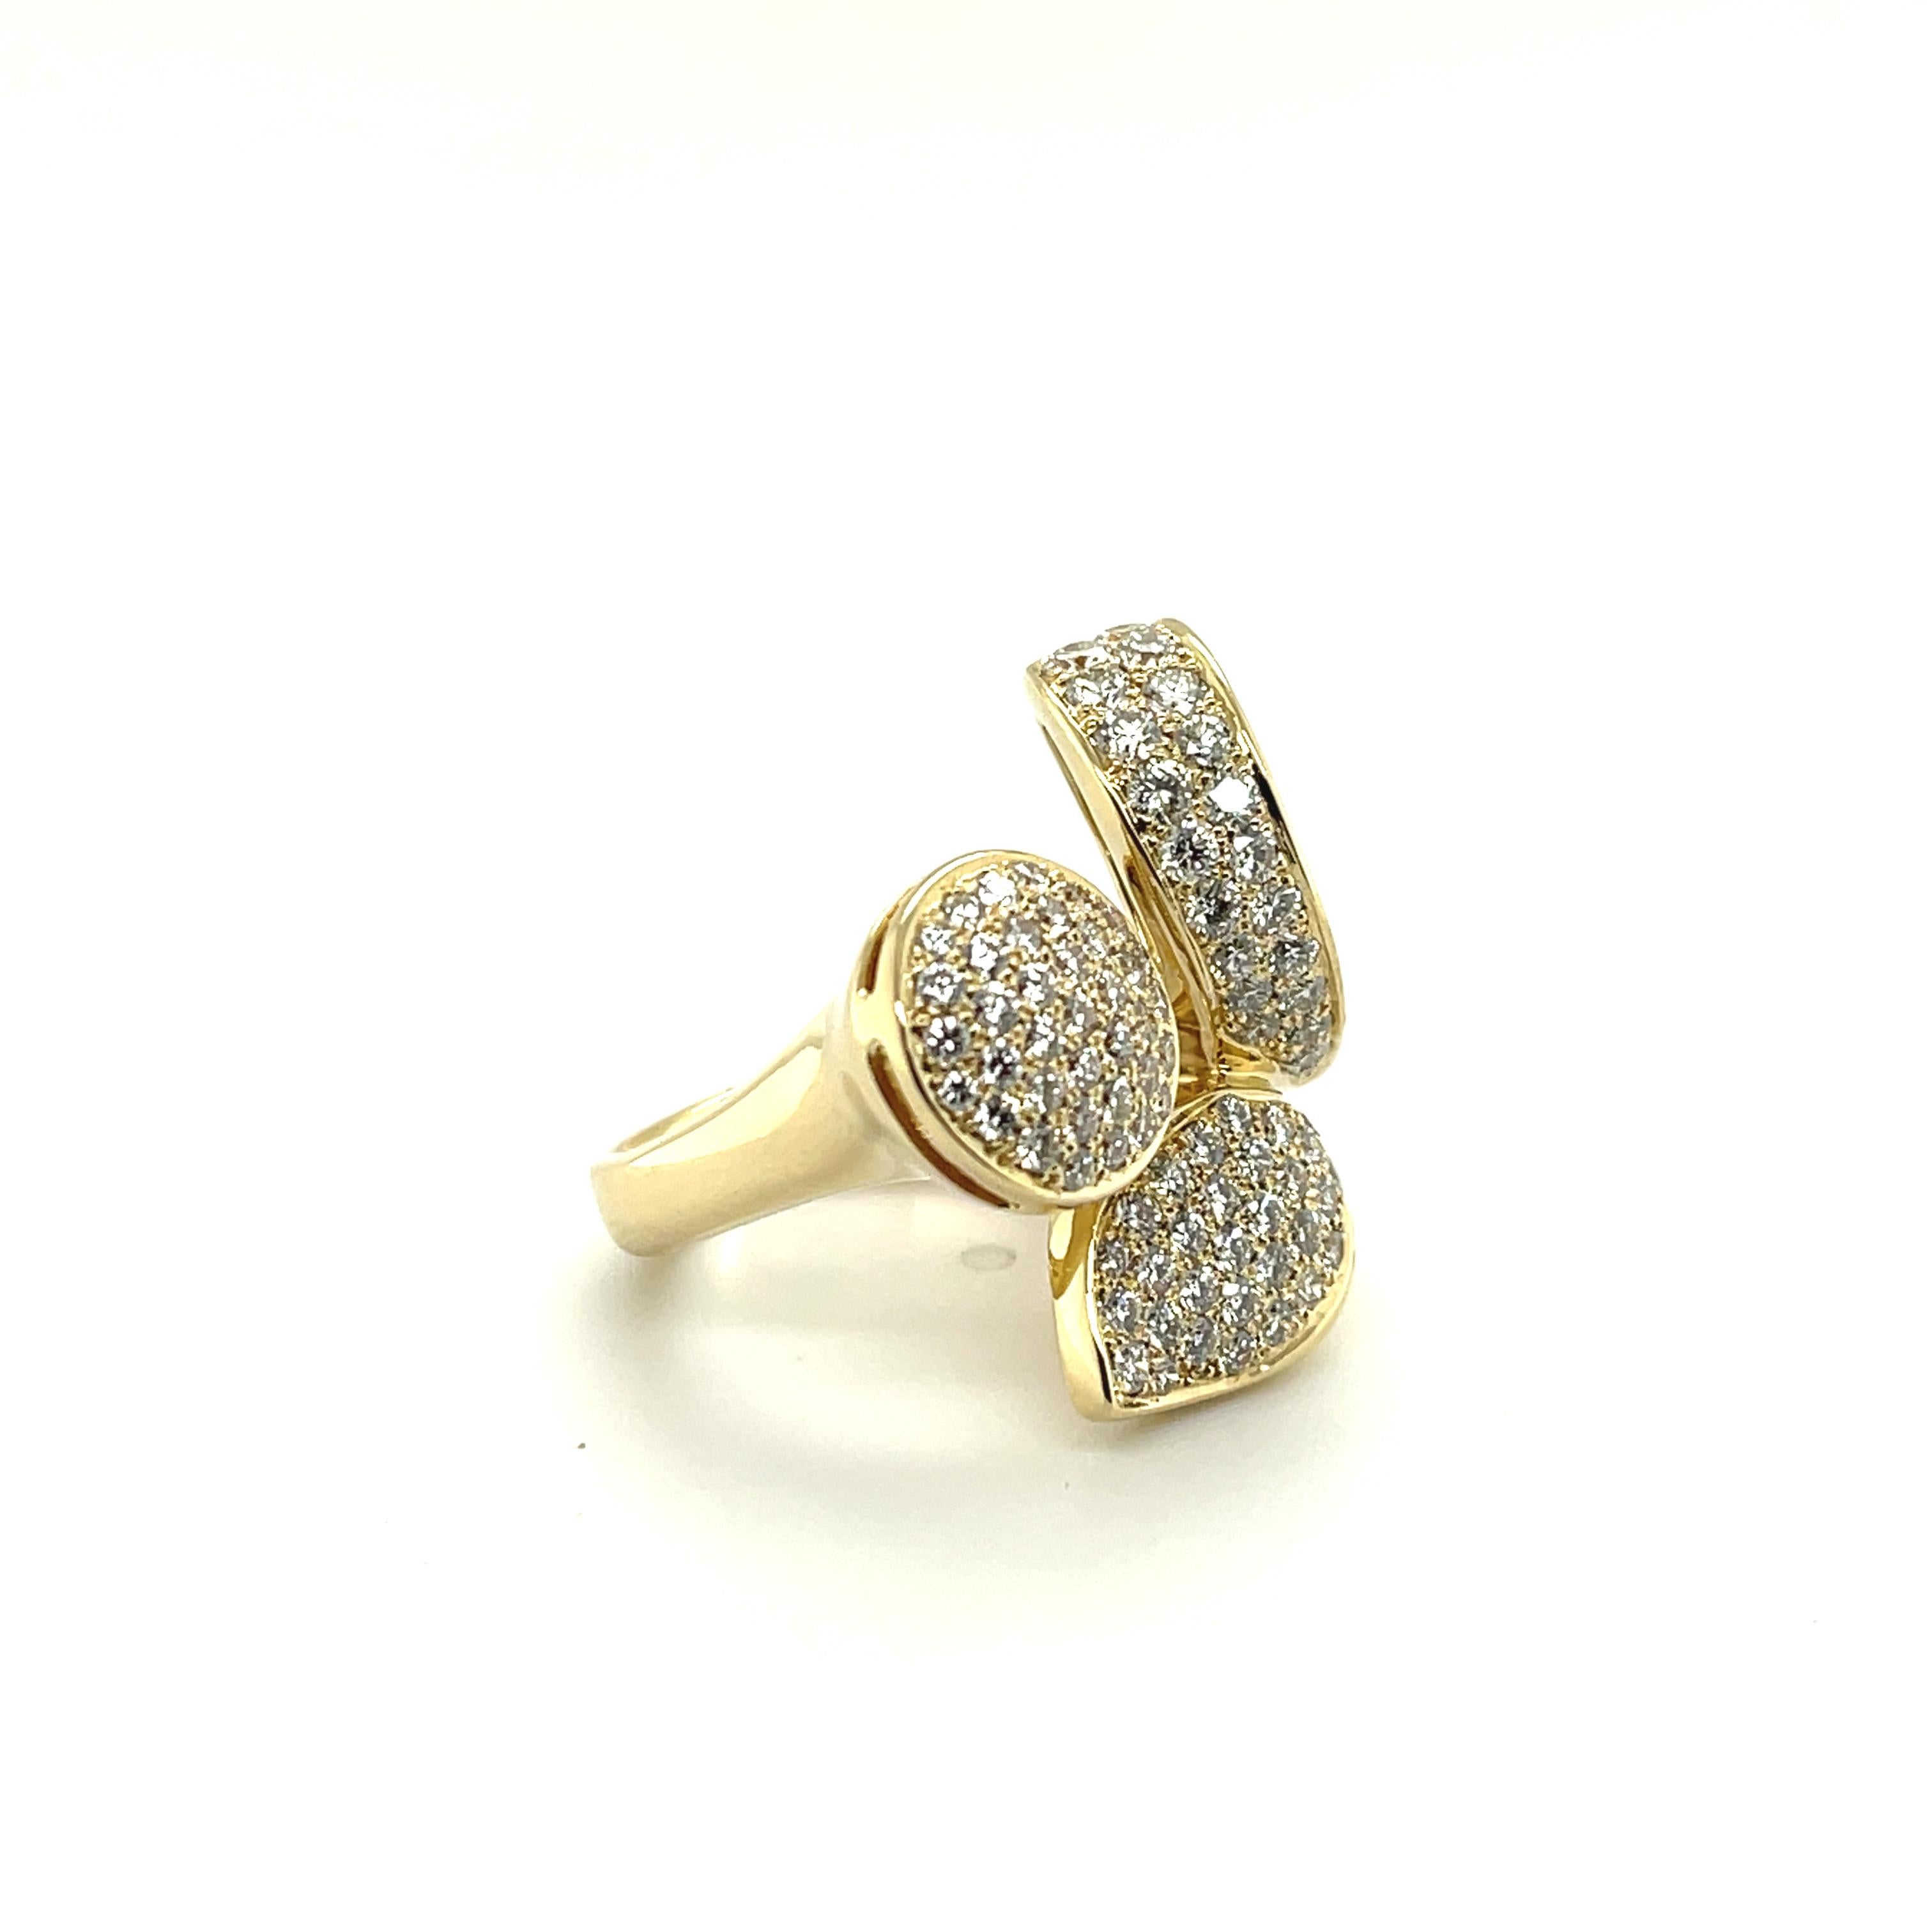 Round Cut RC003 - 18K Yellow Gold Fancy Shapes Ring with Round Brilliant Diamonds For Sale